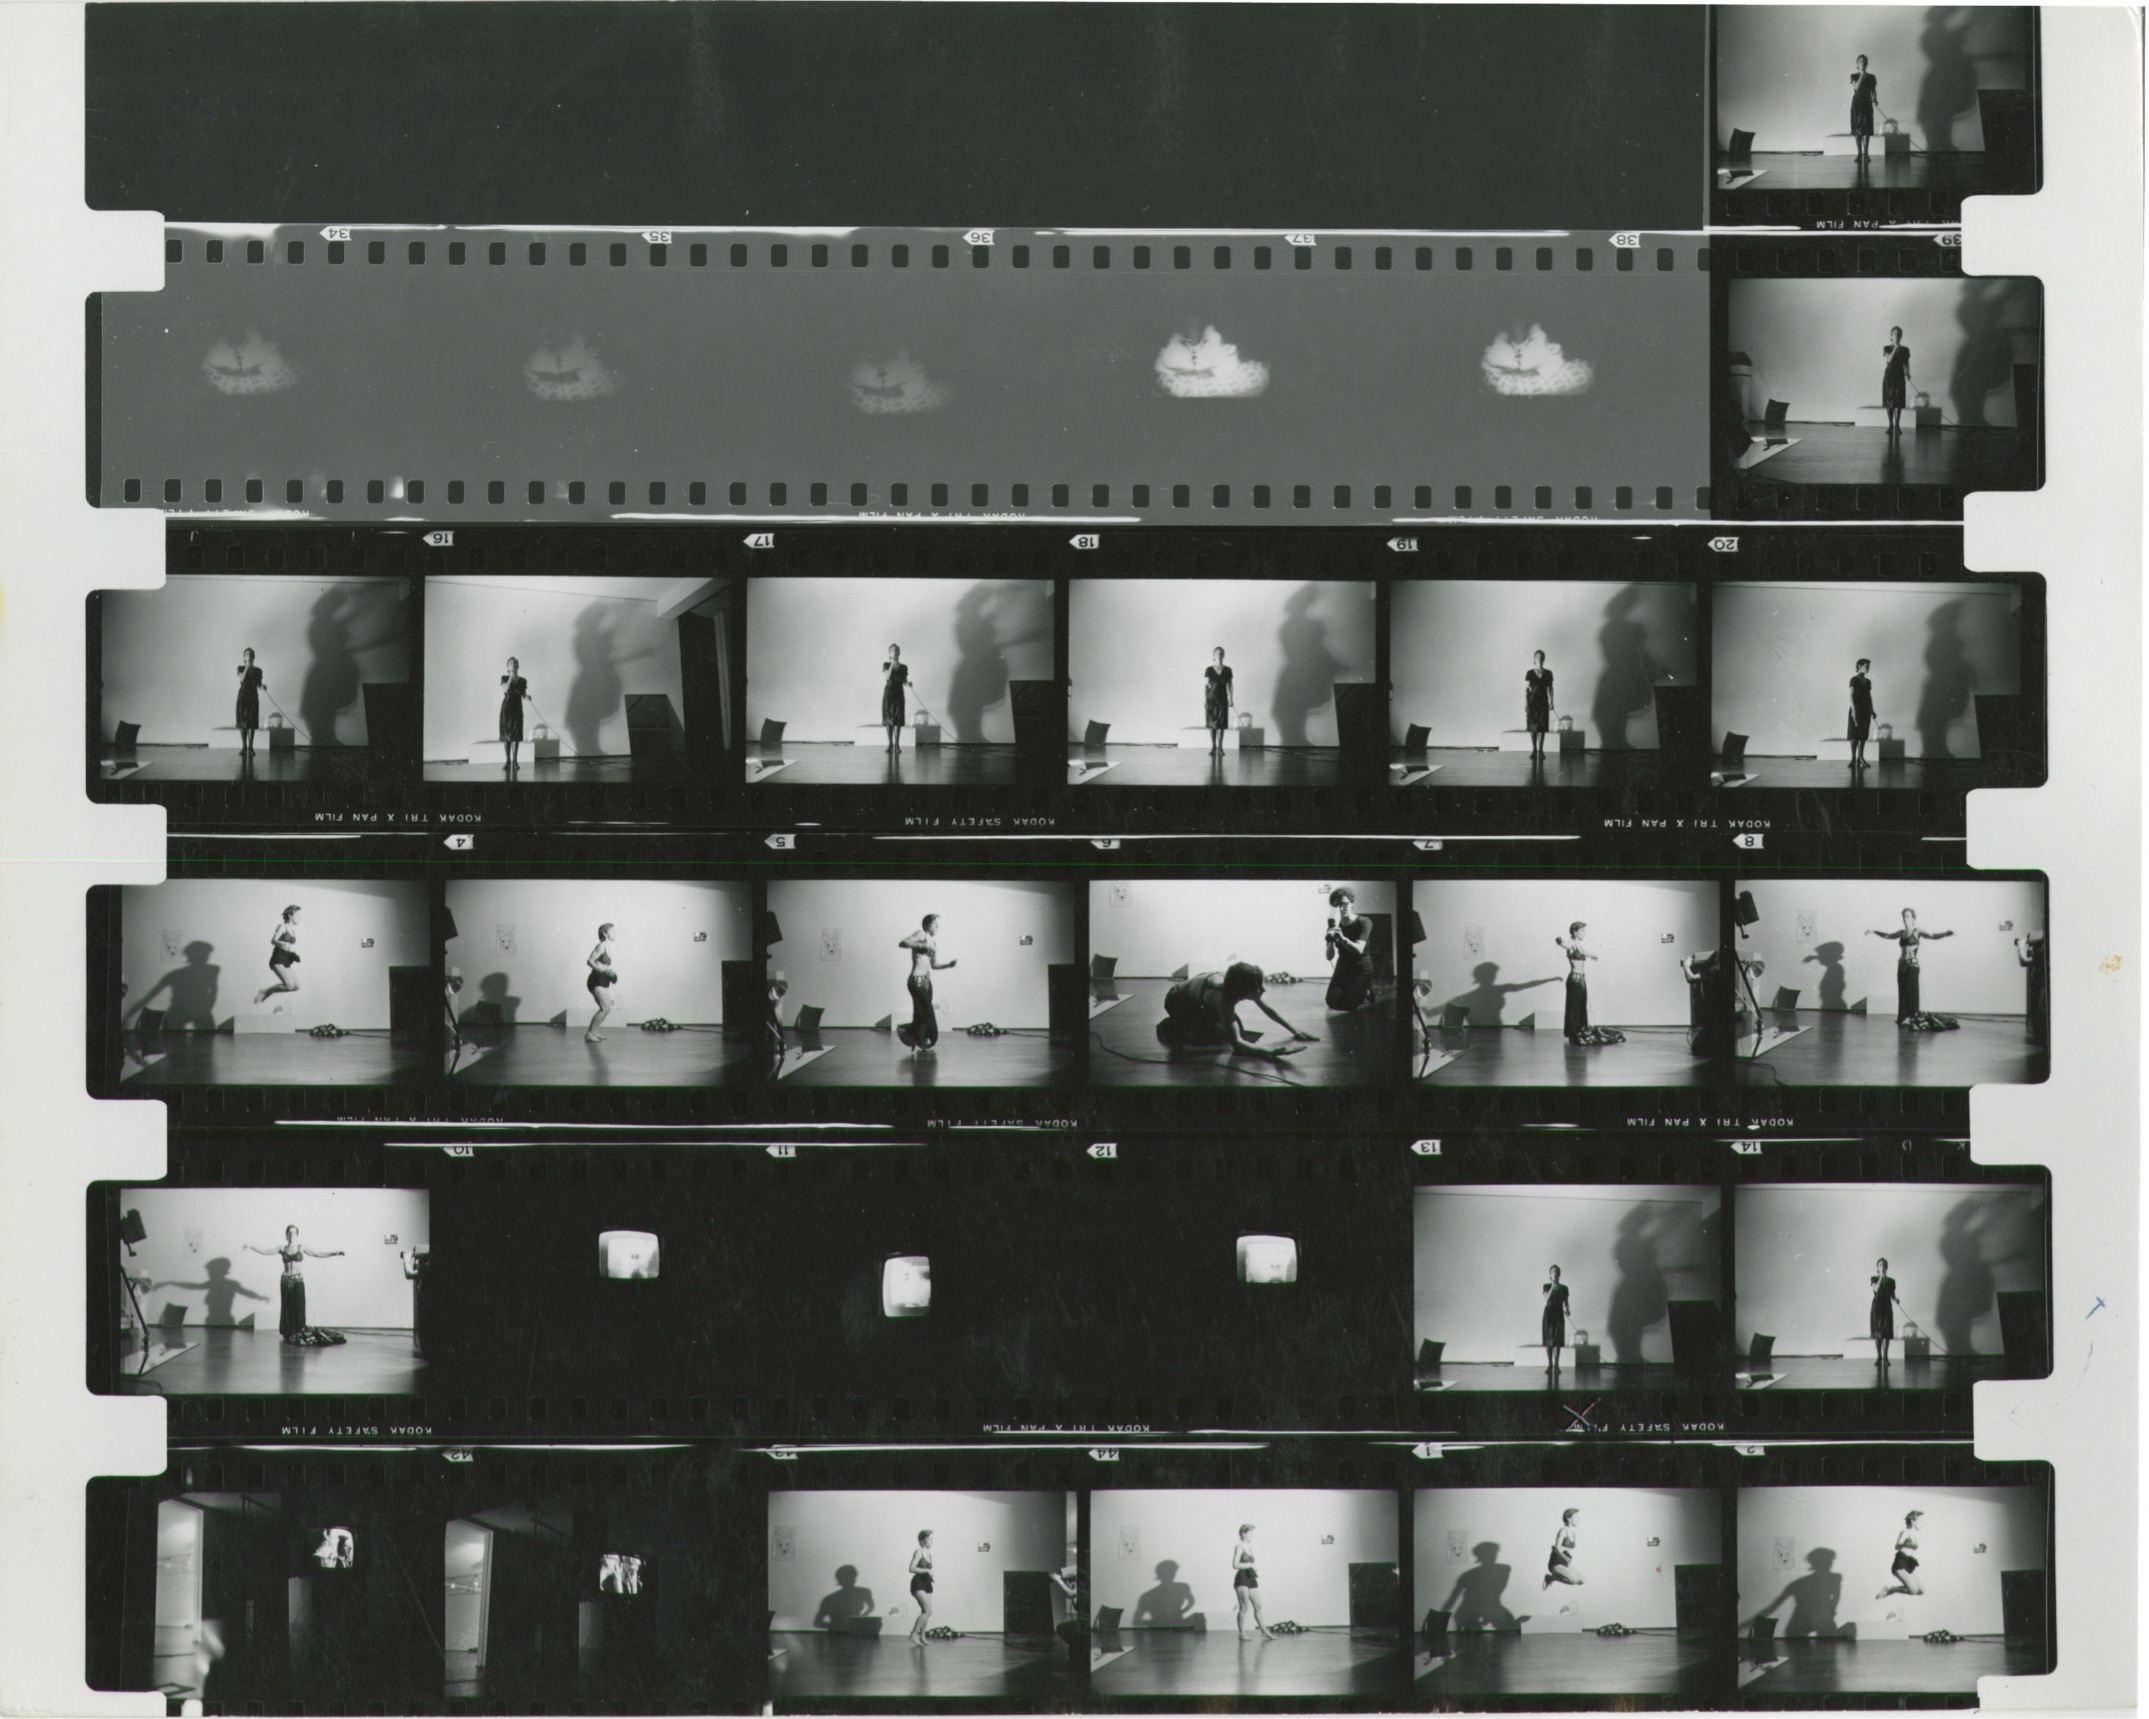 Photographic contact sheet showing different parts of Jonas’s performance